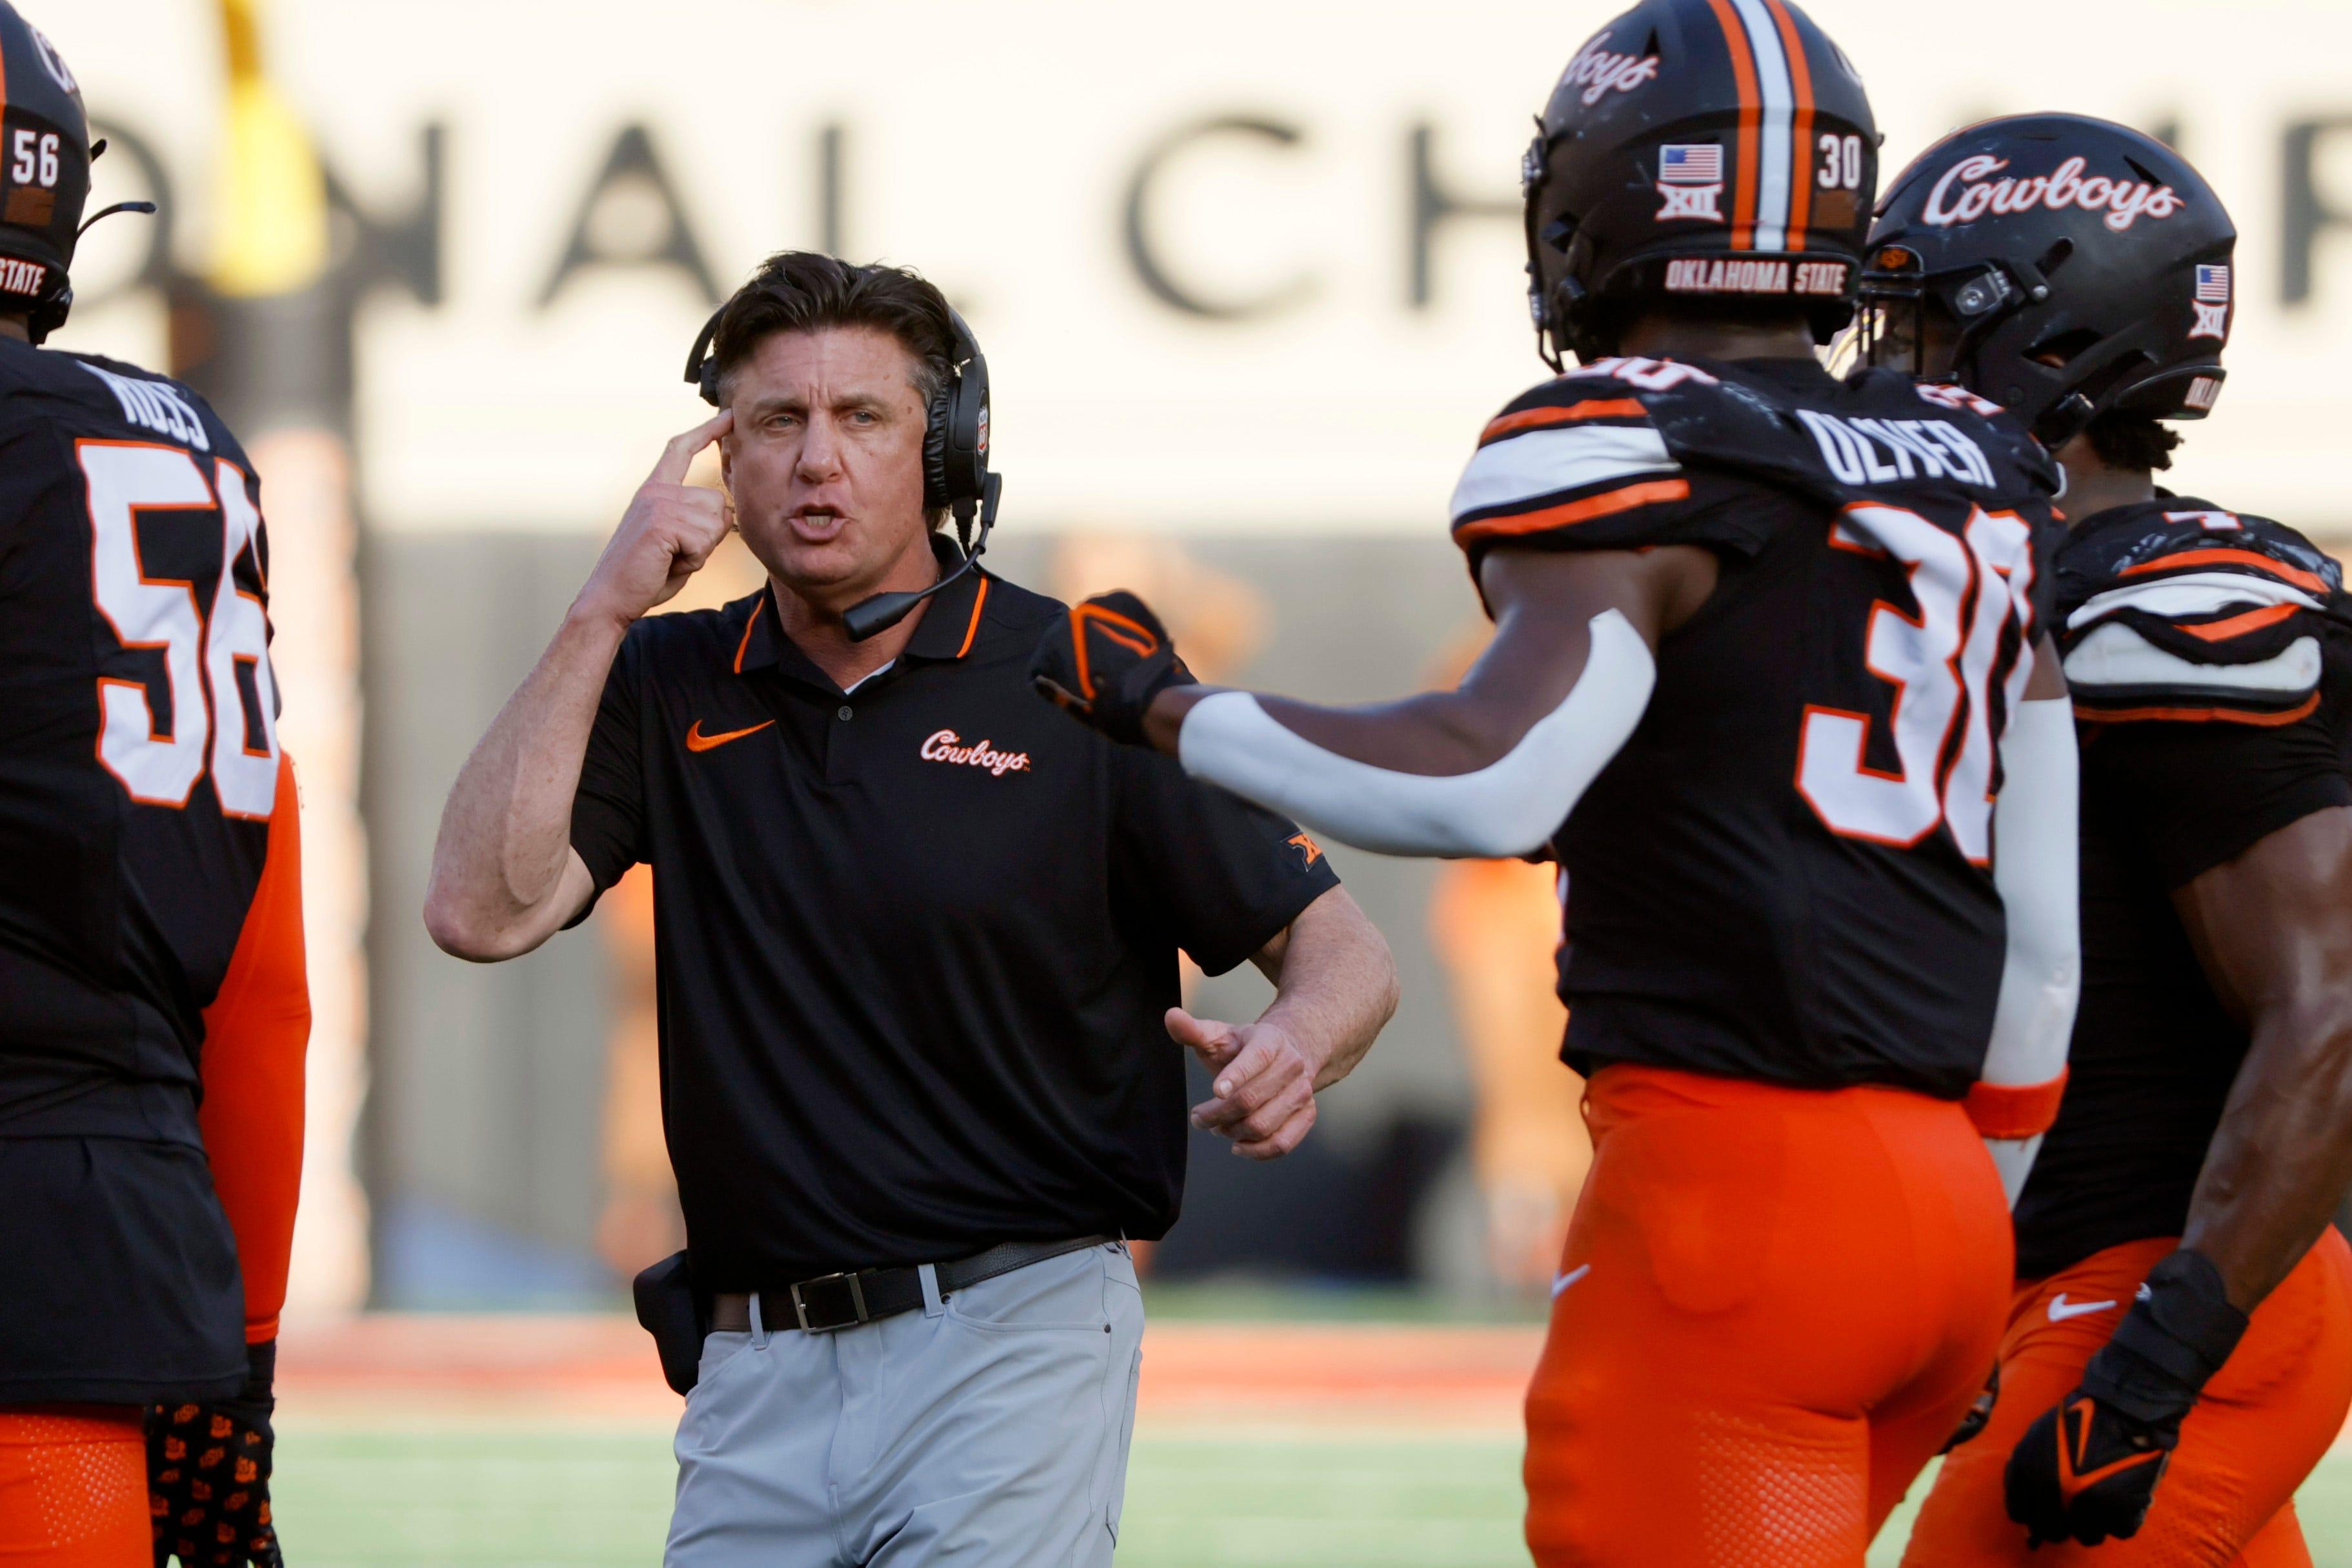 Oklahoma State coach Mike Gundy talks with his players during a Bedlam college football game between the Oklahoma State University Cowboys (OSU) and the University of Oklahoma Sooners (OU) at Boone Pickens Stadium in Stillwater, Okla., Saturday, Nov. 4, 2023. Oklahoma State won 27-24.